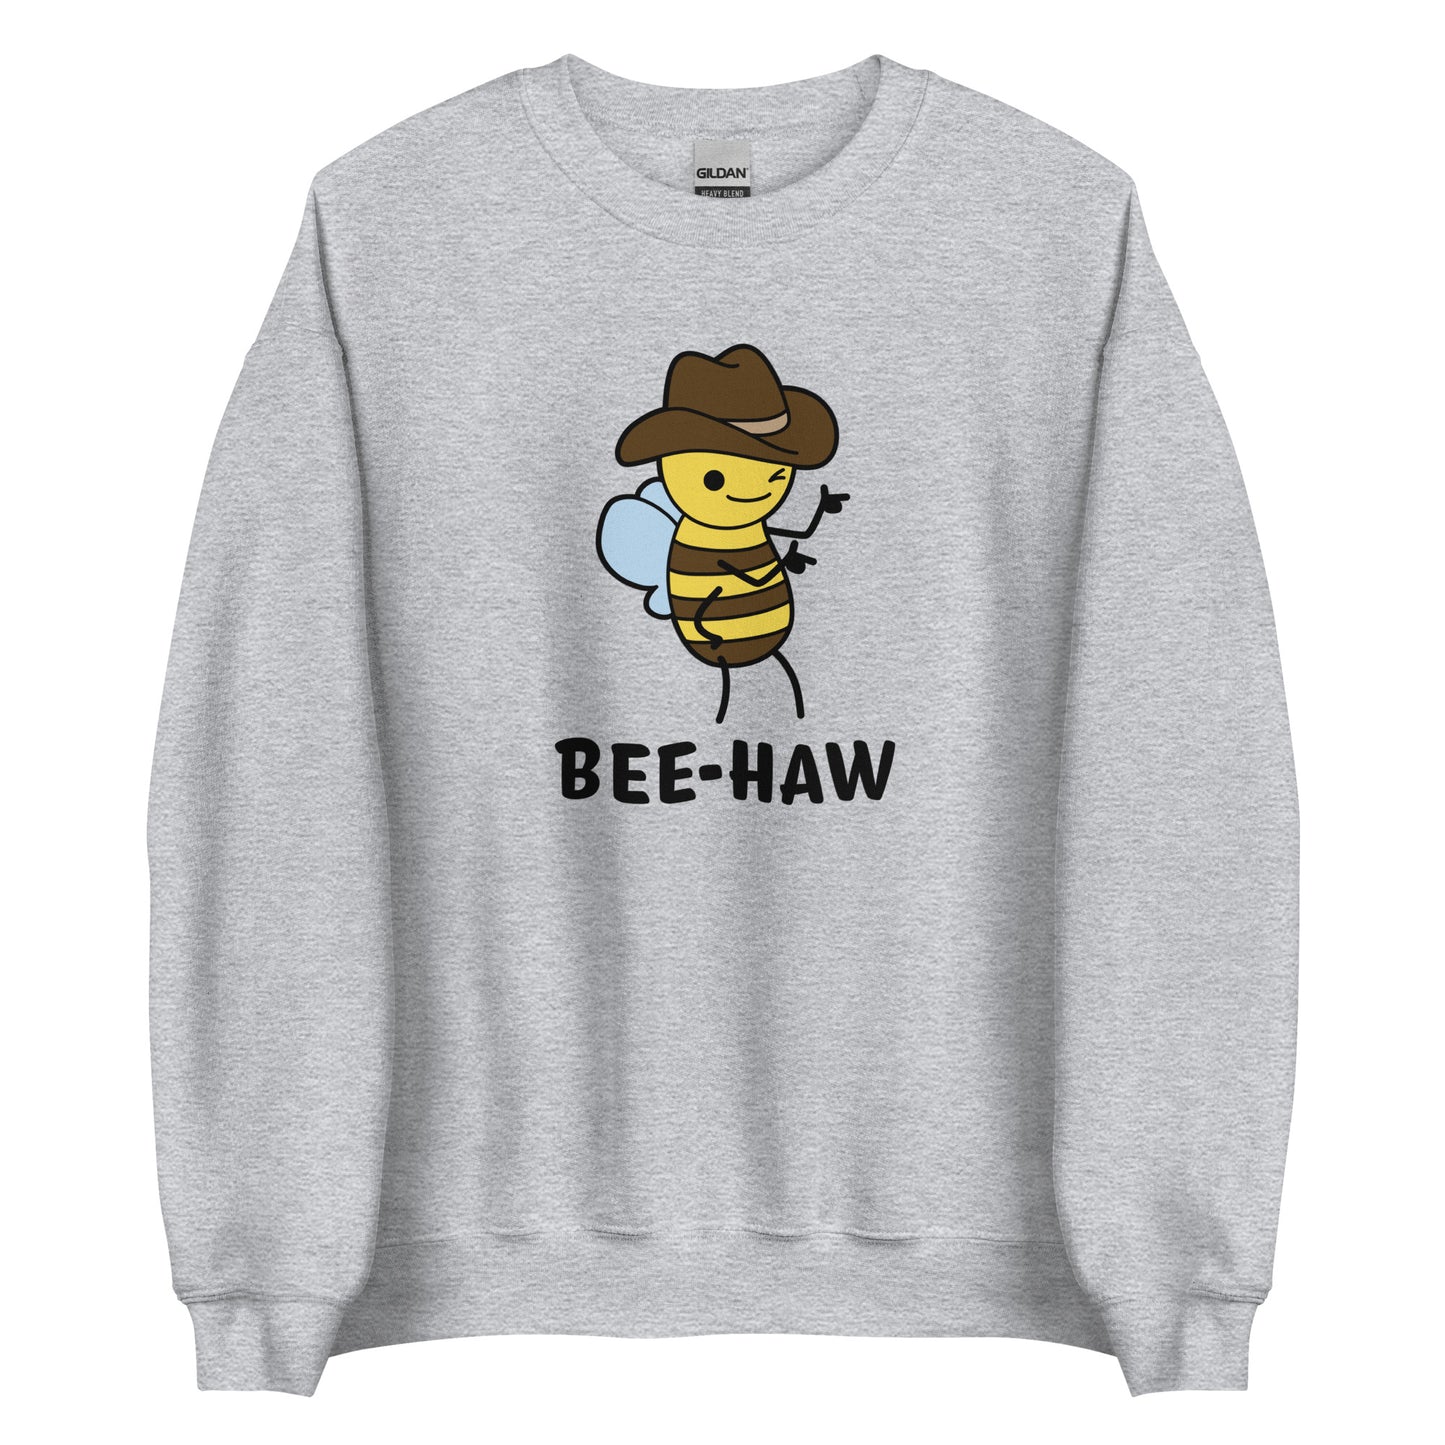 A grey crewneck sweatshirt featuring an image of a bee in a cowboy hat. The bee is winking and holding up "finger guns". Text beneath the bee reads "Bee-Haw"